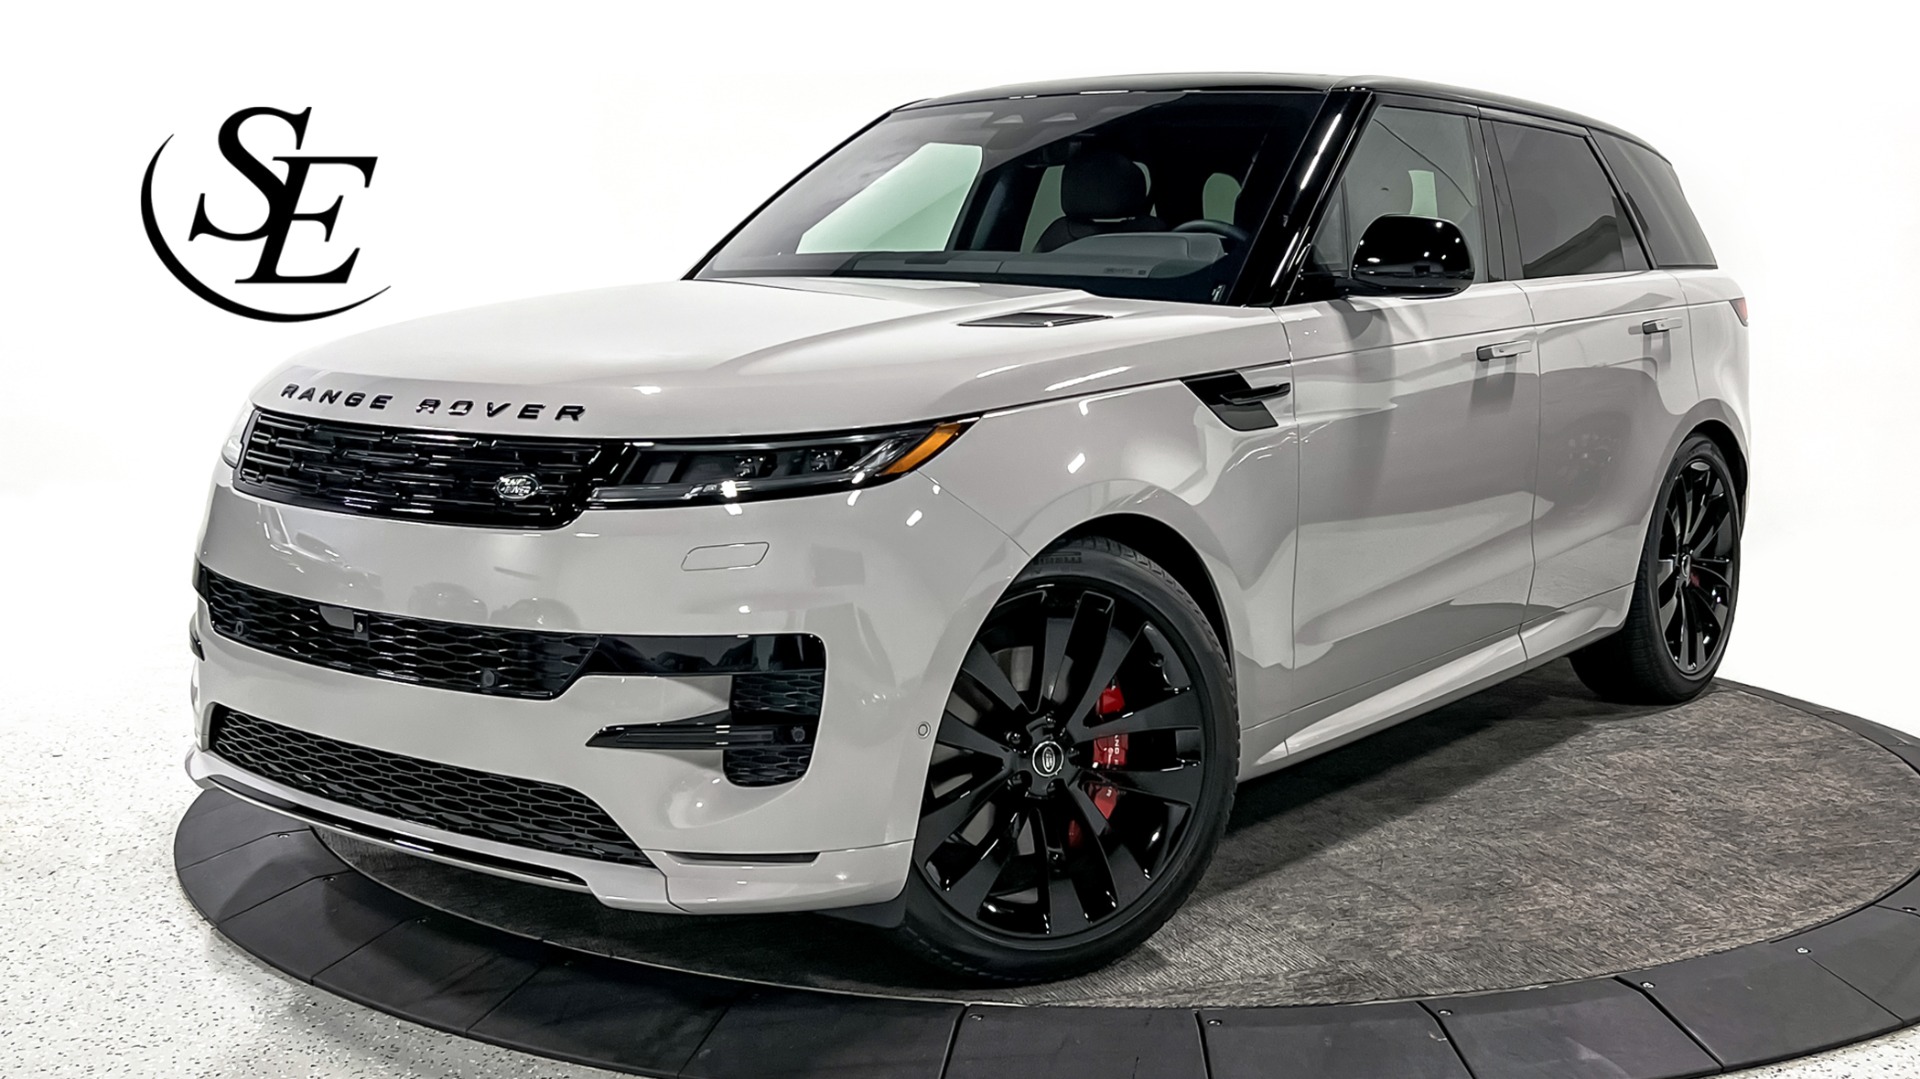 2023 Land Rover Range Rover Sport Prices, Reviews, and Photos - MotorTrend